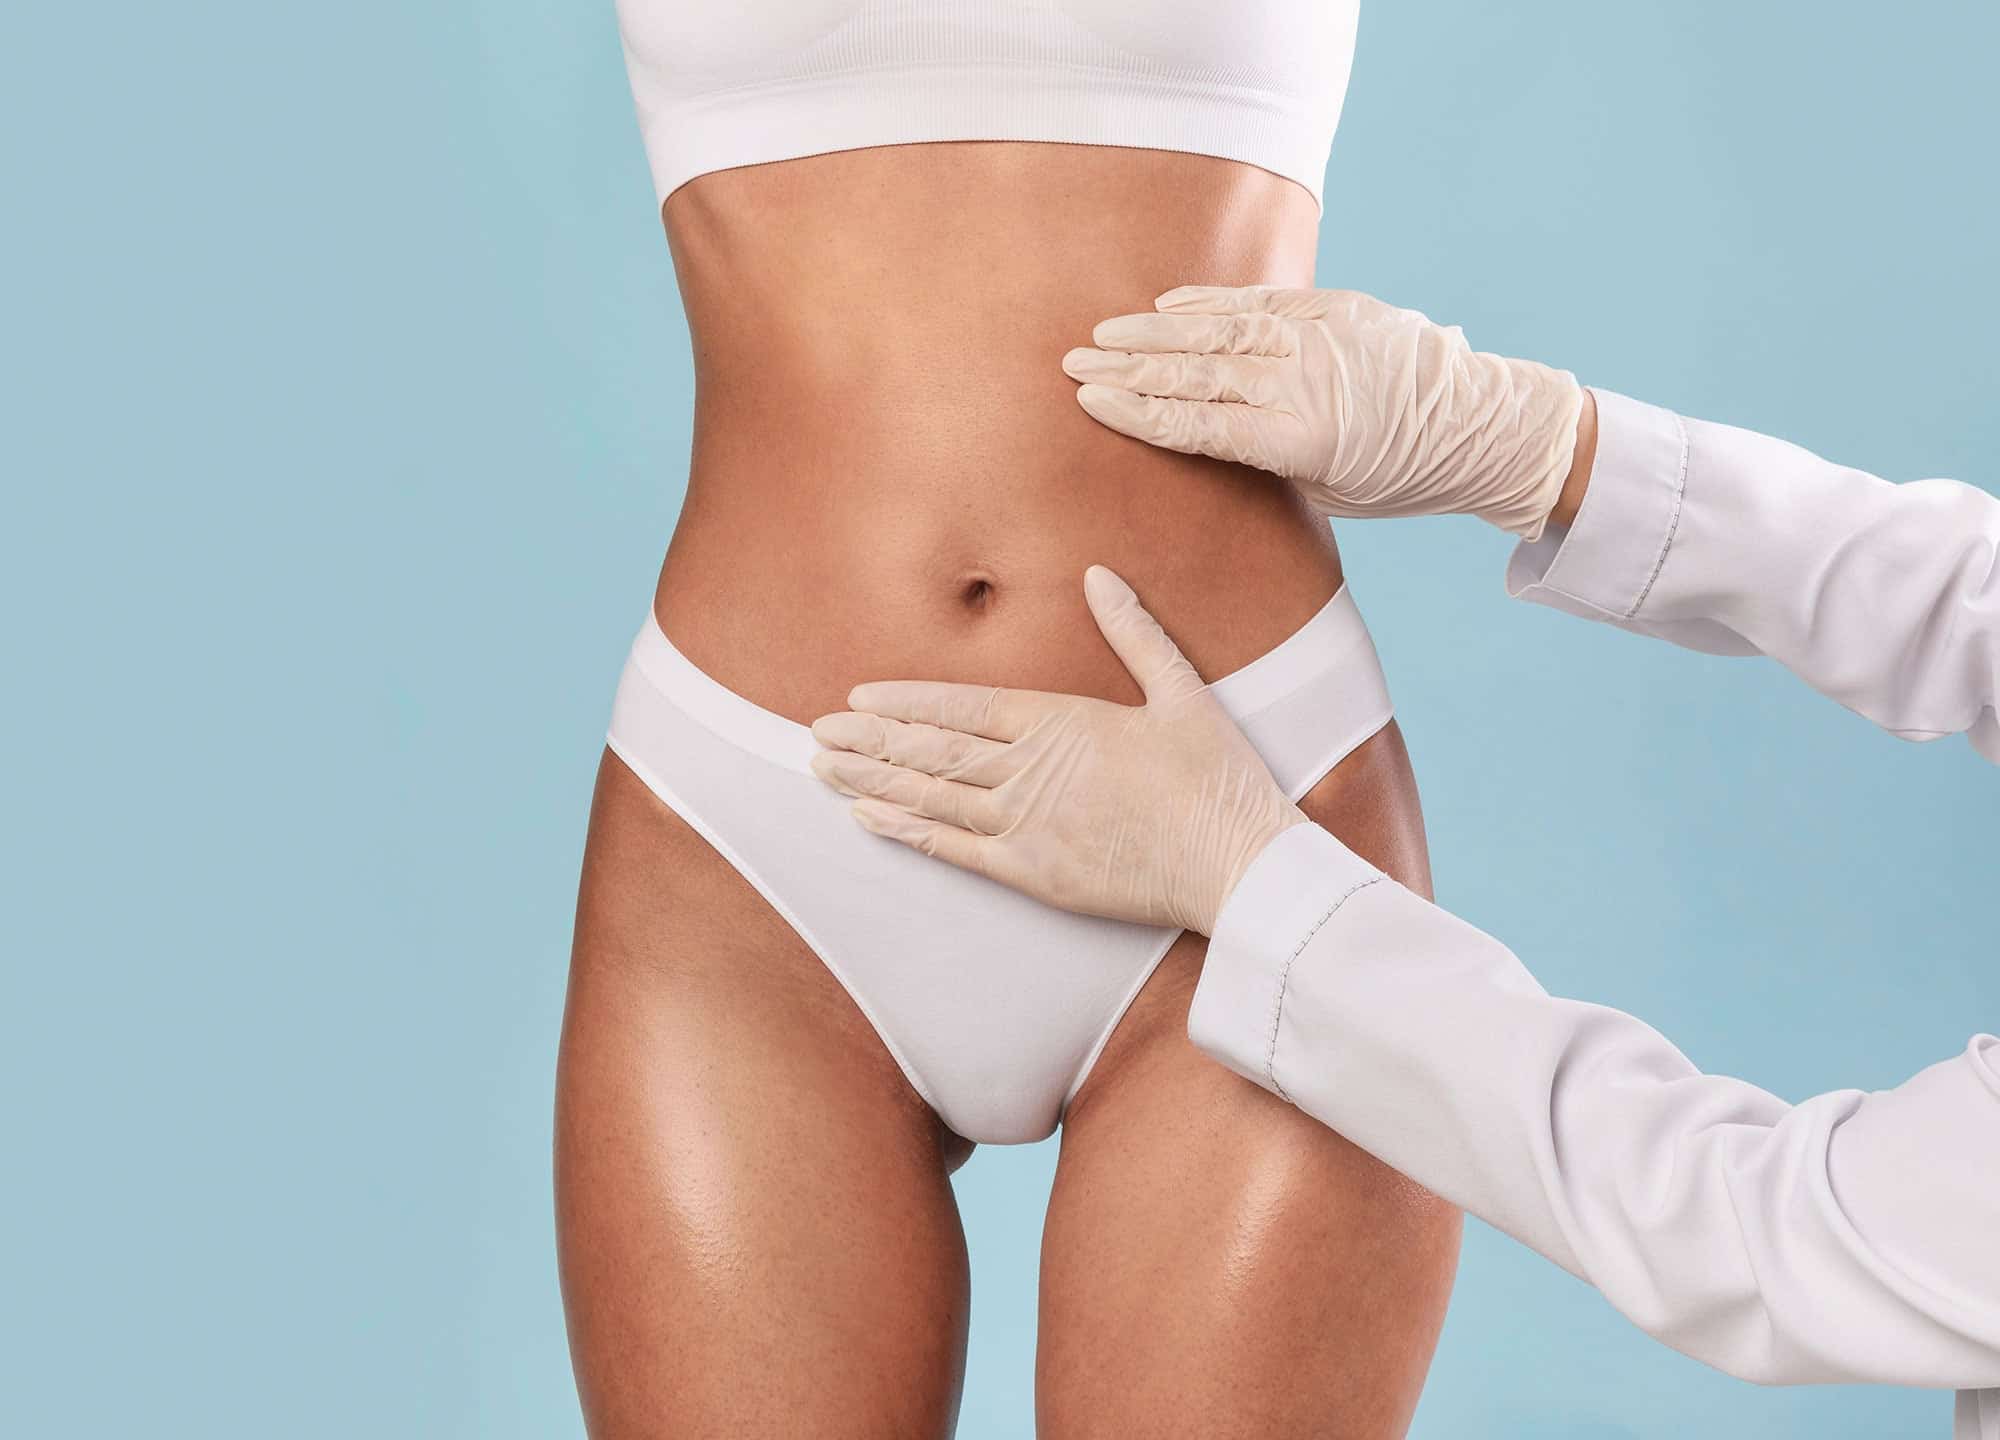 We asked the experts for the facts on Coolsculpting—what to expect and how to get the best results. Learn more about fat freezing.